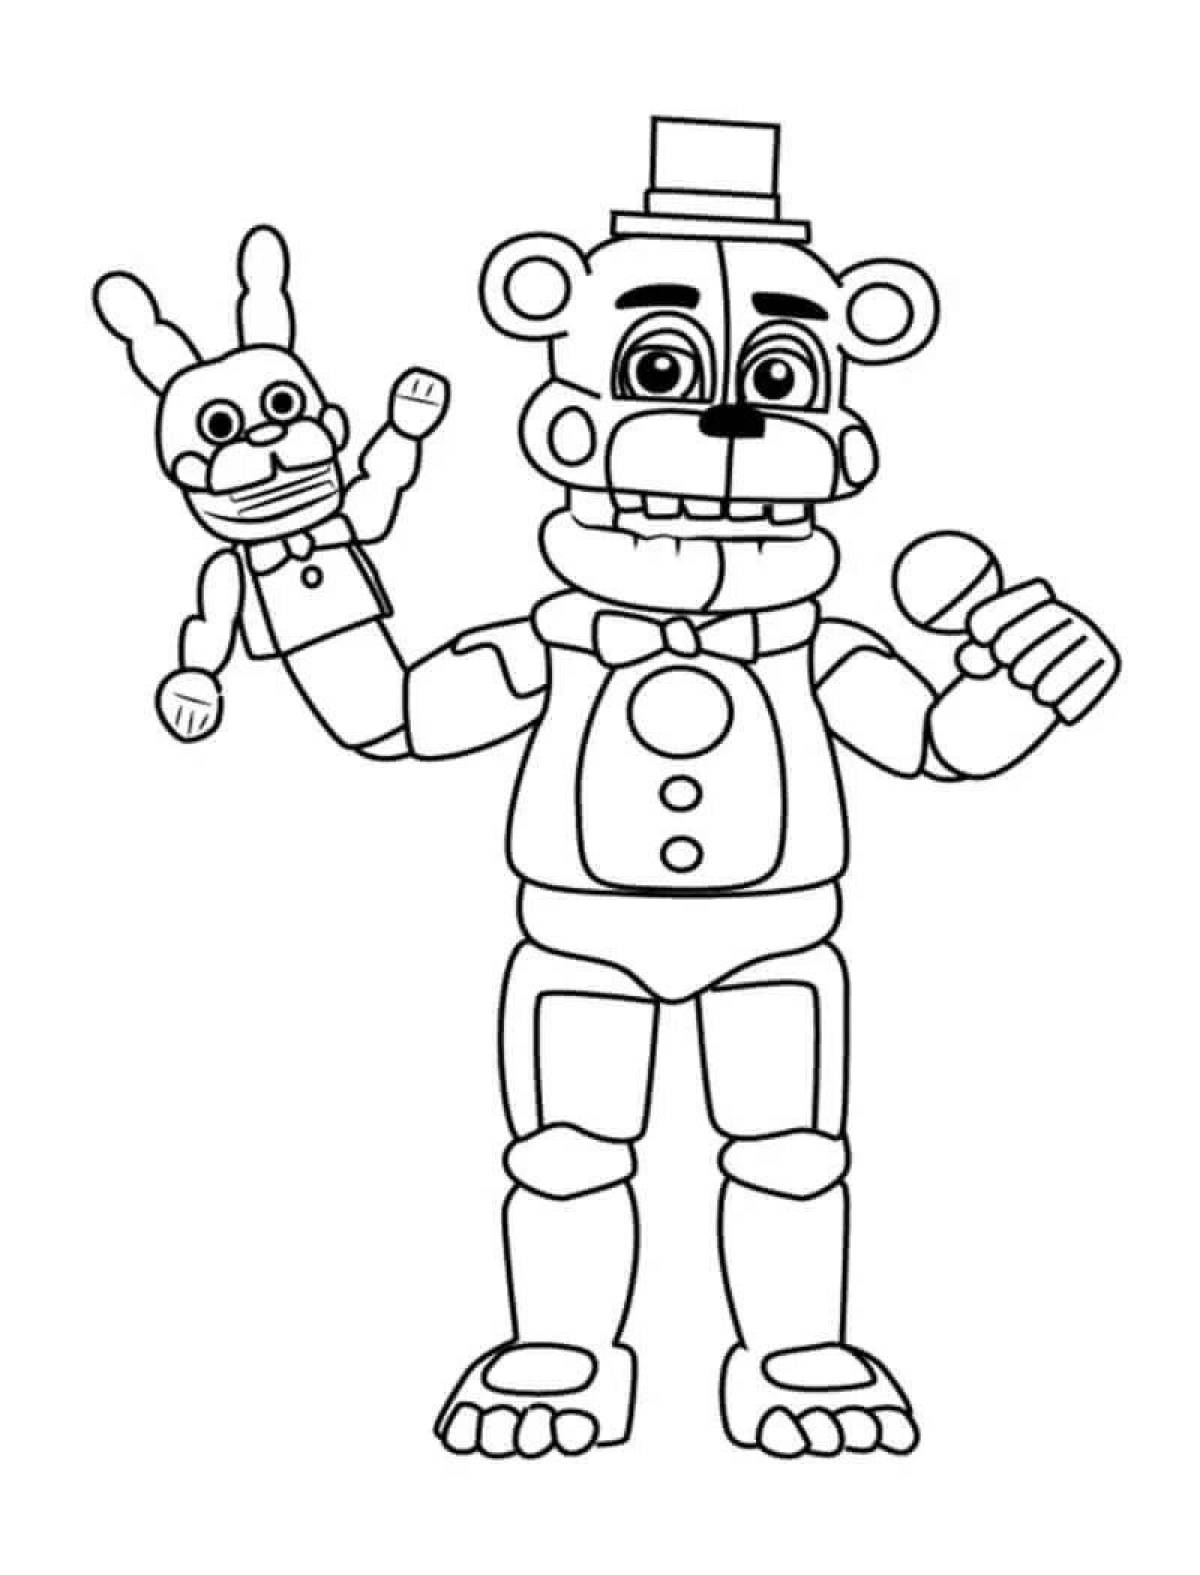 Violent animatronic seal coloring book